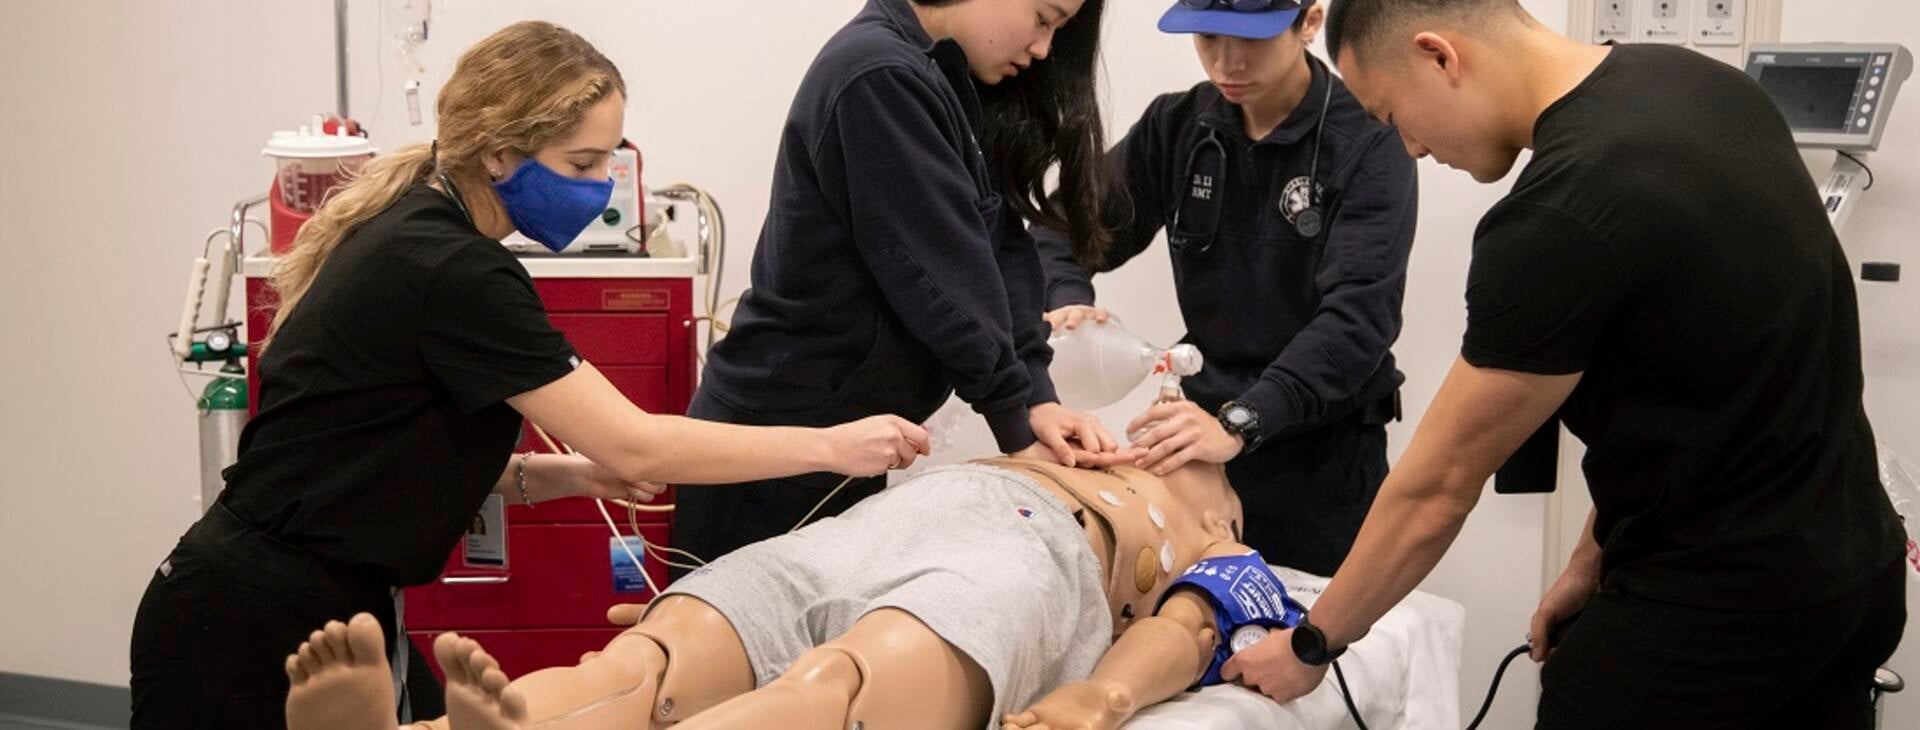 Medical students in the simulation lab in 2020